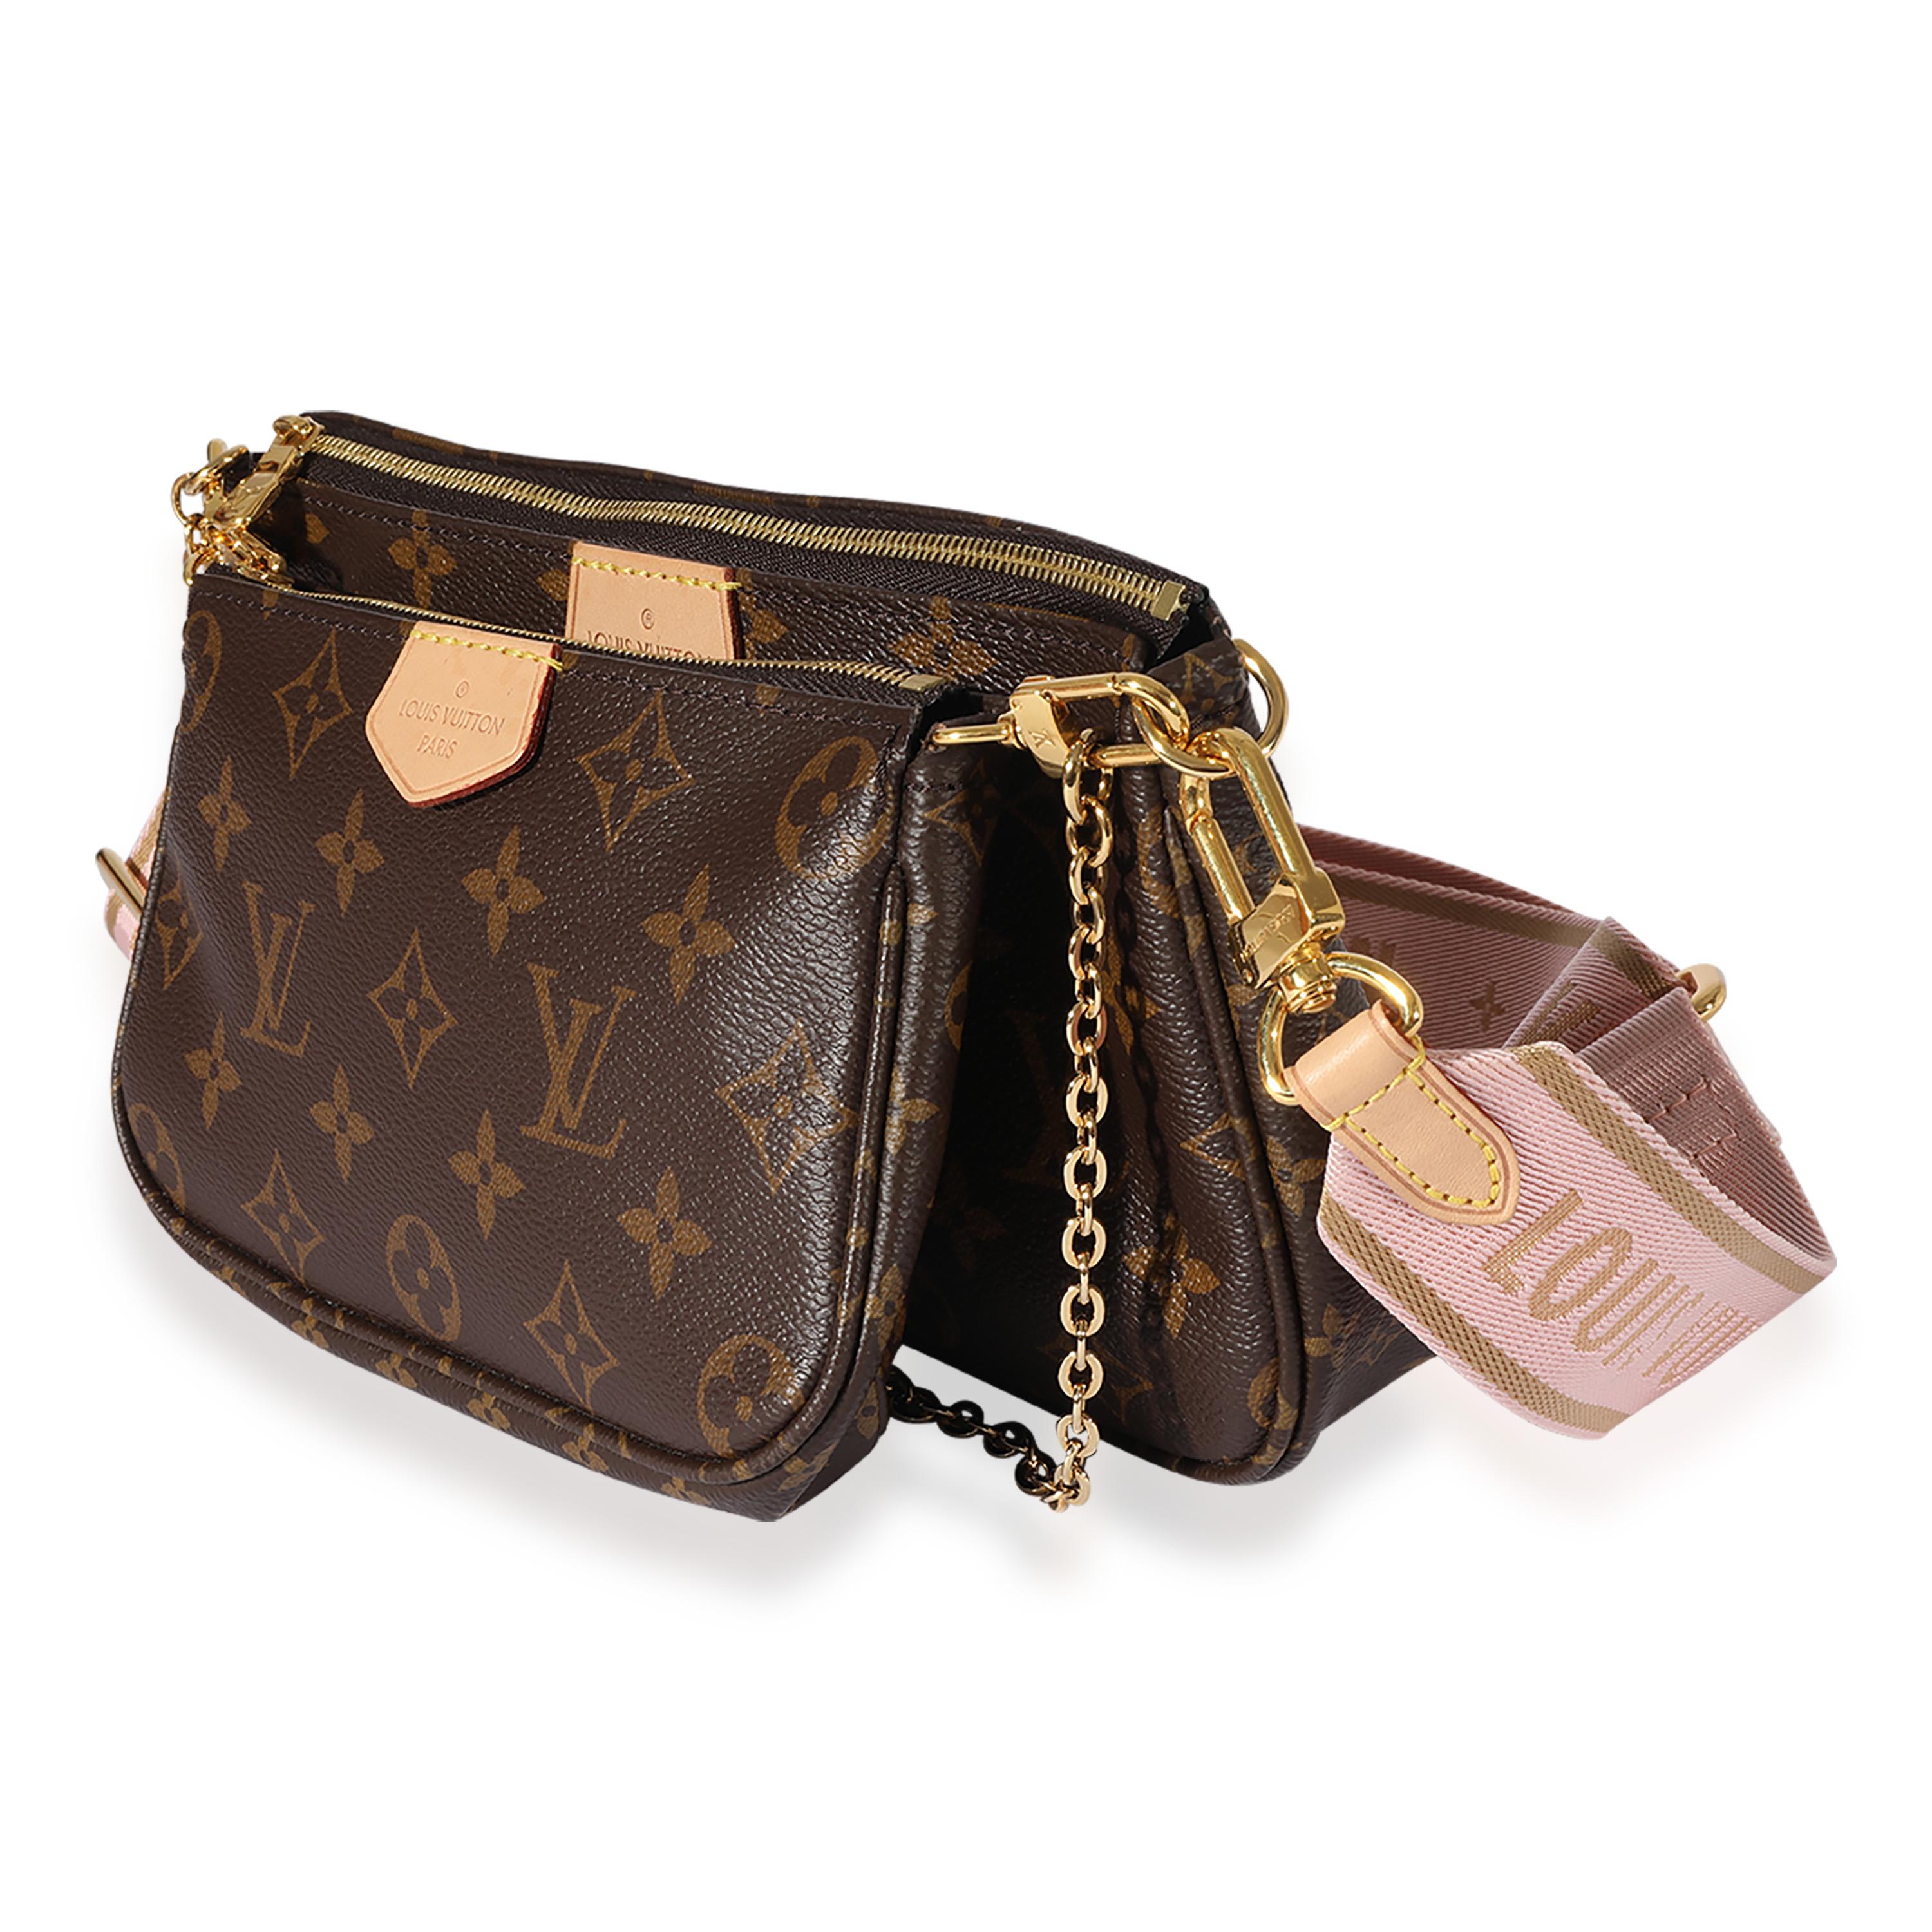 Listing Title: Louis Vuitton Rose Clair Monogram Multi Pochette
SKU: 125726
MSRP: 2570.00
Condition: Pre-owned 
Handbag Condition: Excellent
Condition Comments: Excellent Condition. Scratching at hardware. Faint scuffing throughout exterior.
Brand: